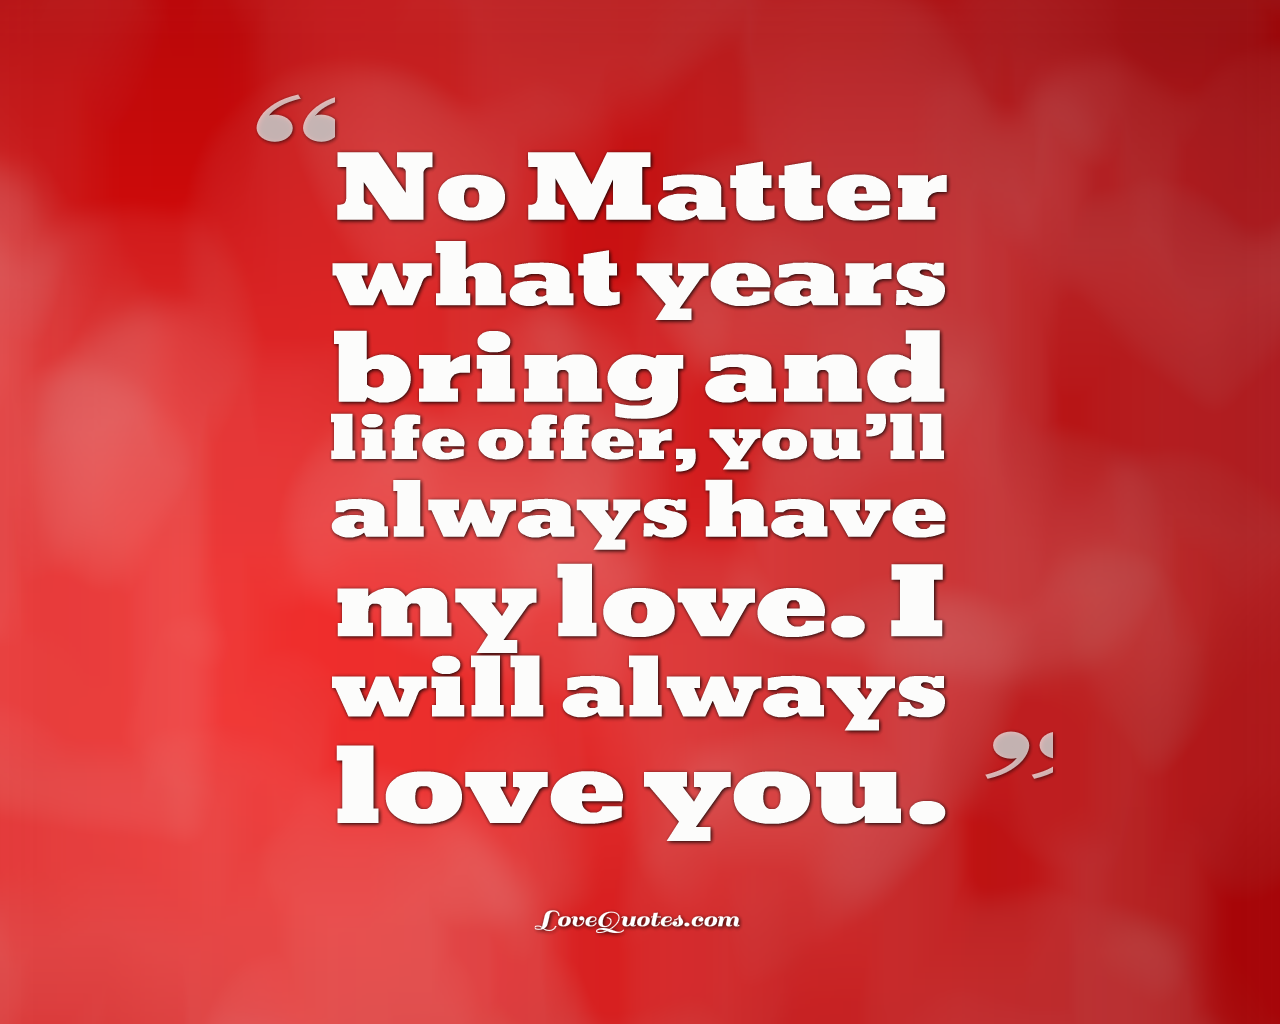 You Always Have My Love - Love Quotes